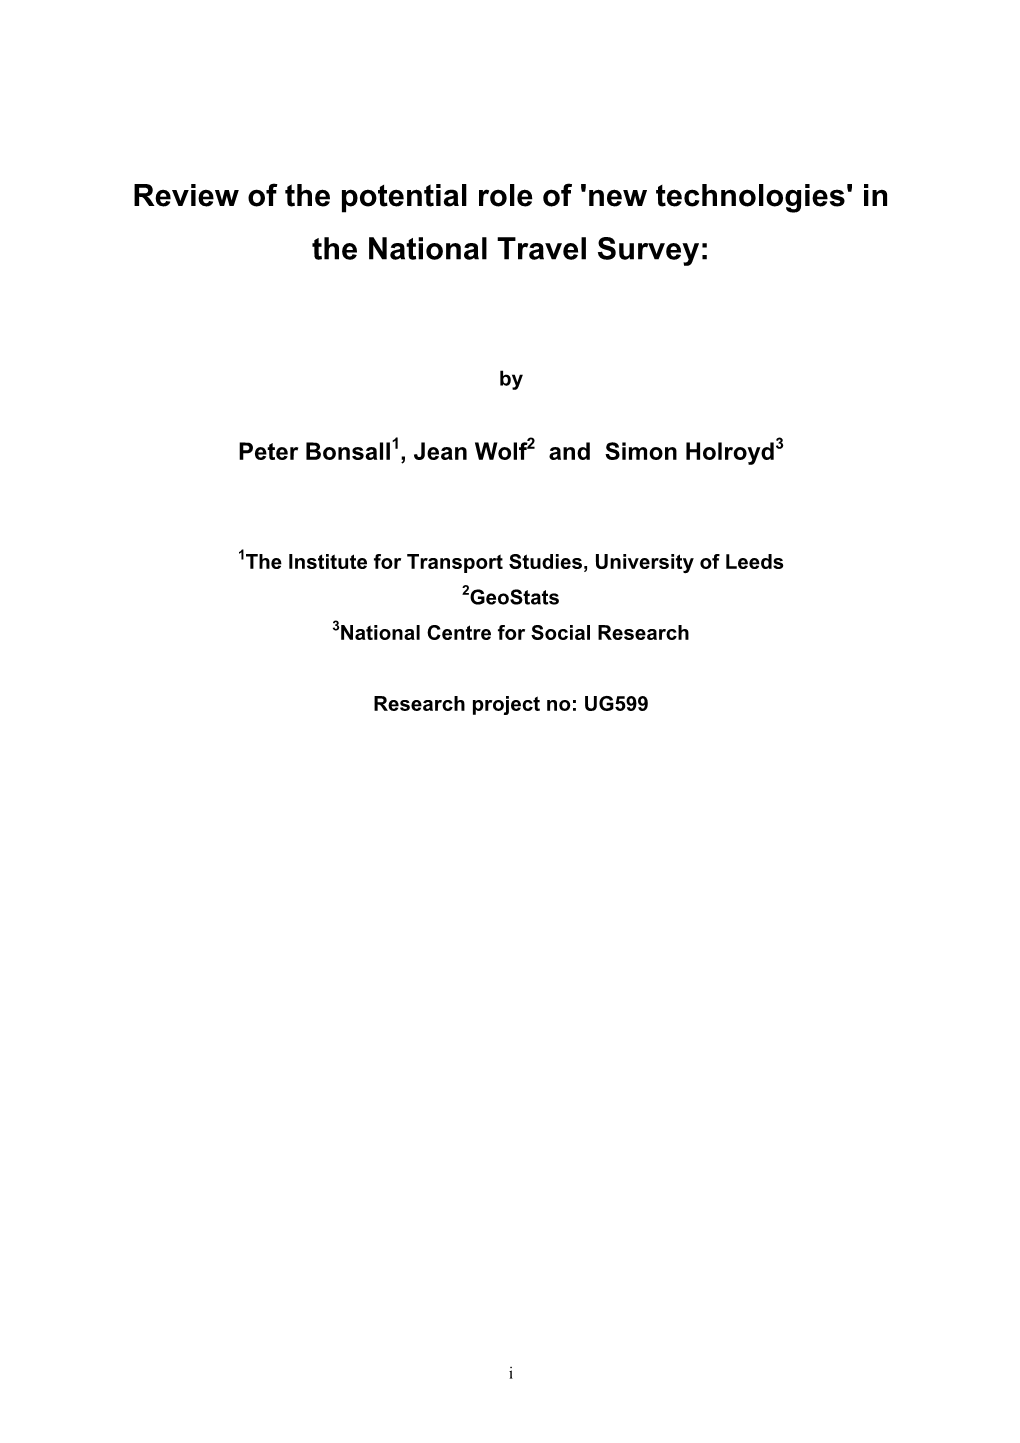 In the National Travel Survey